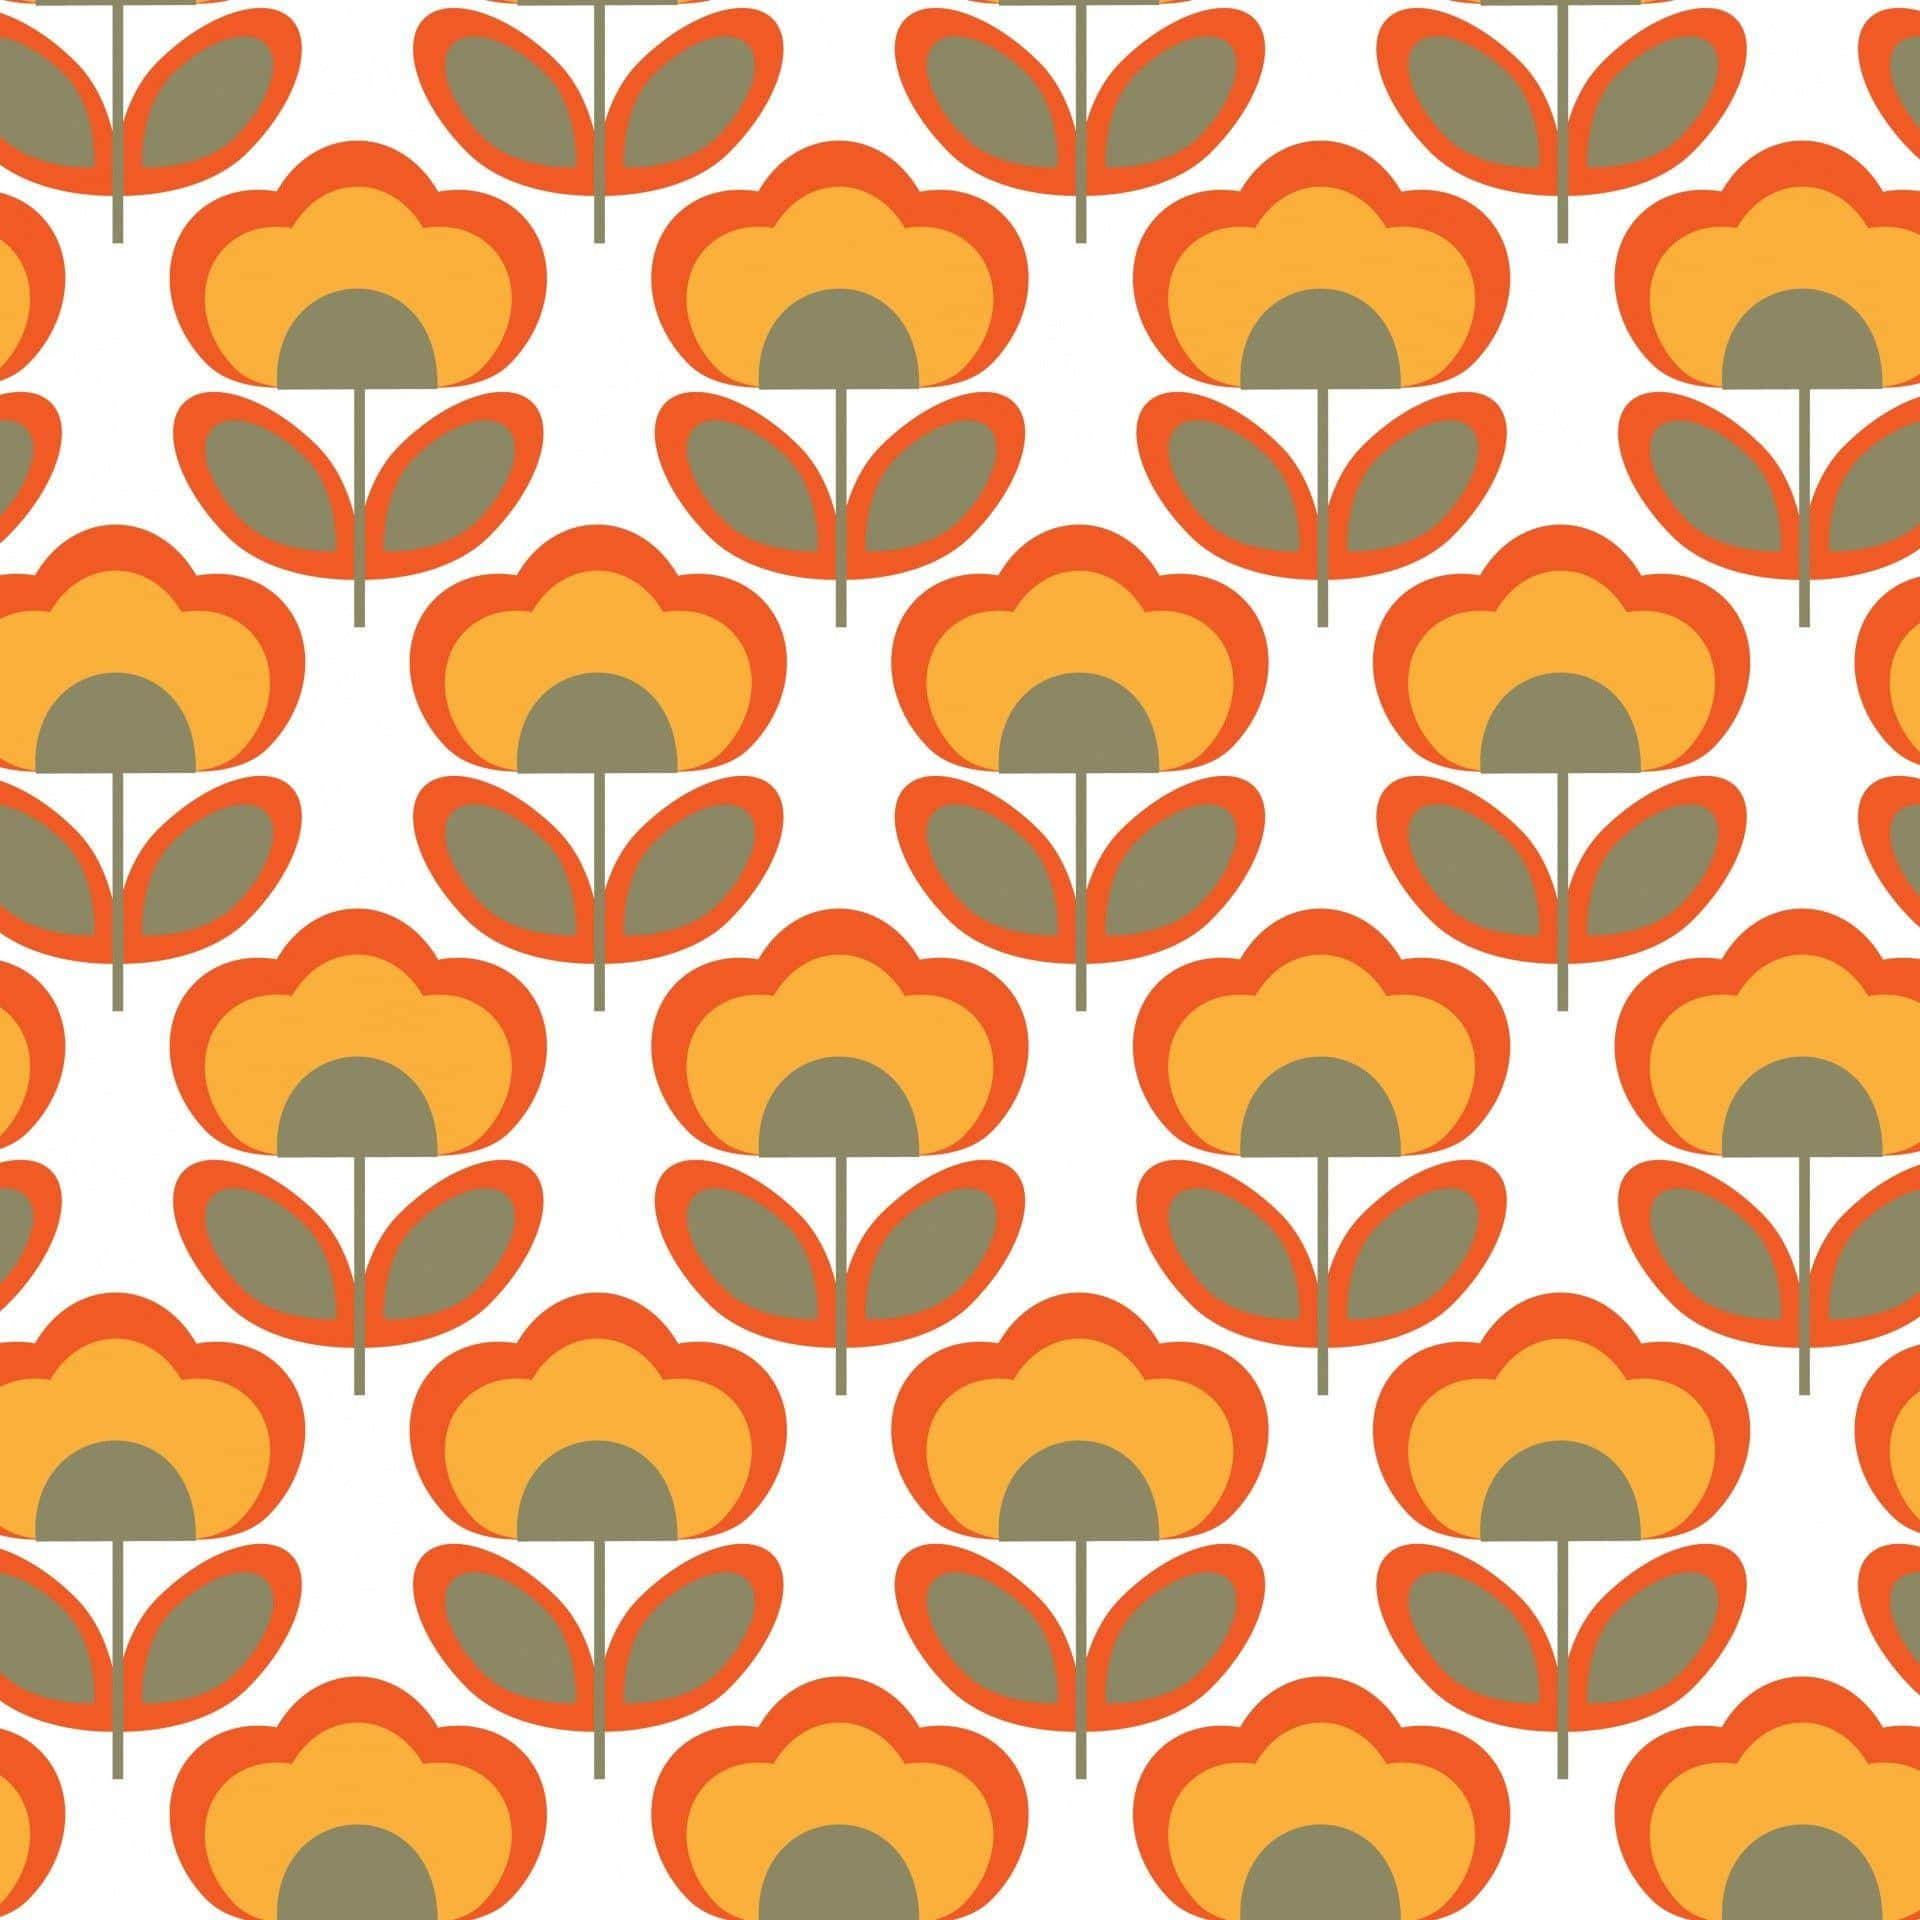 Celebrating the freedom and liberation of the '70s Hippie Movement Wallpaper